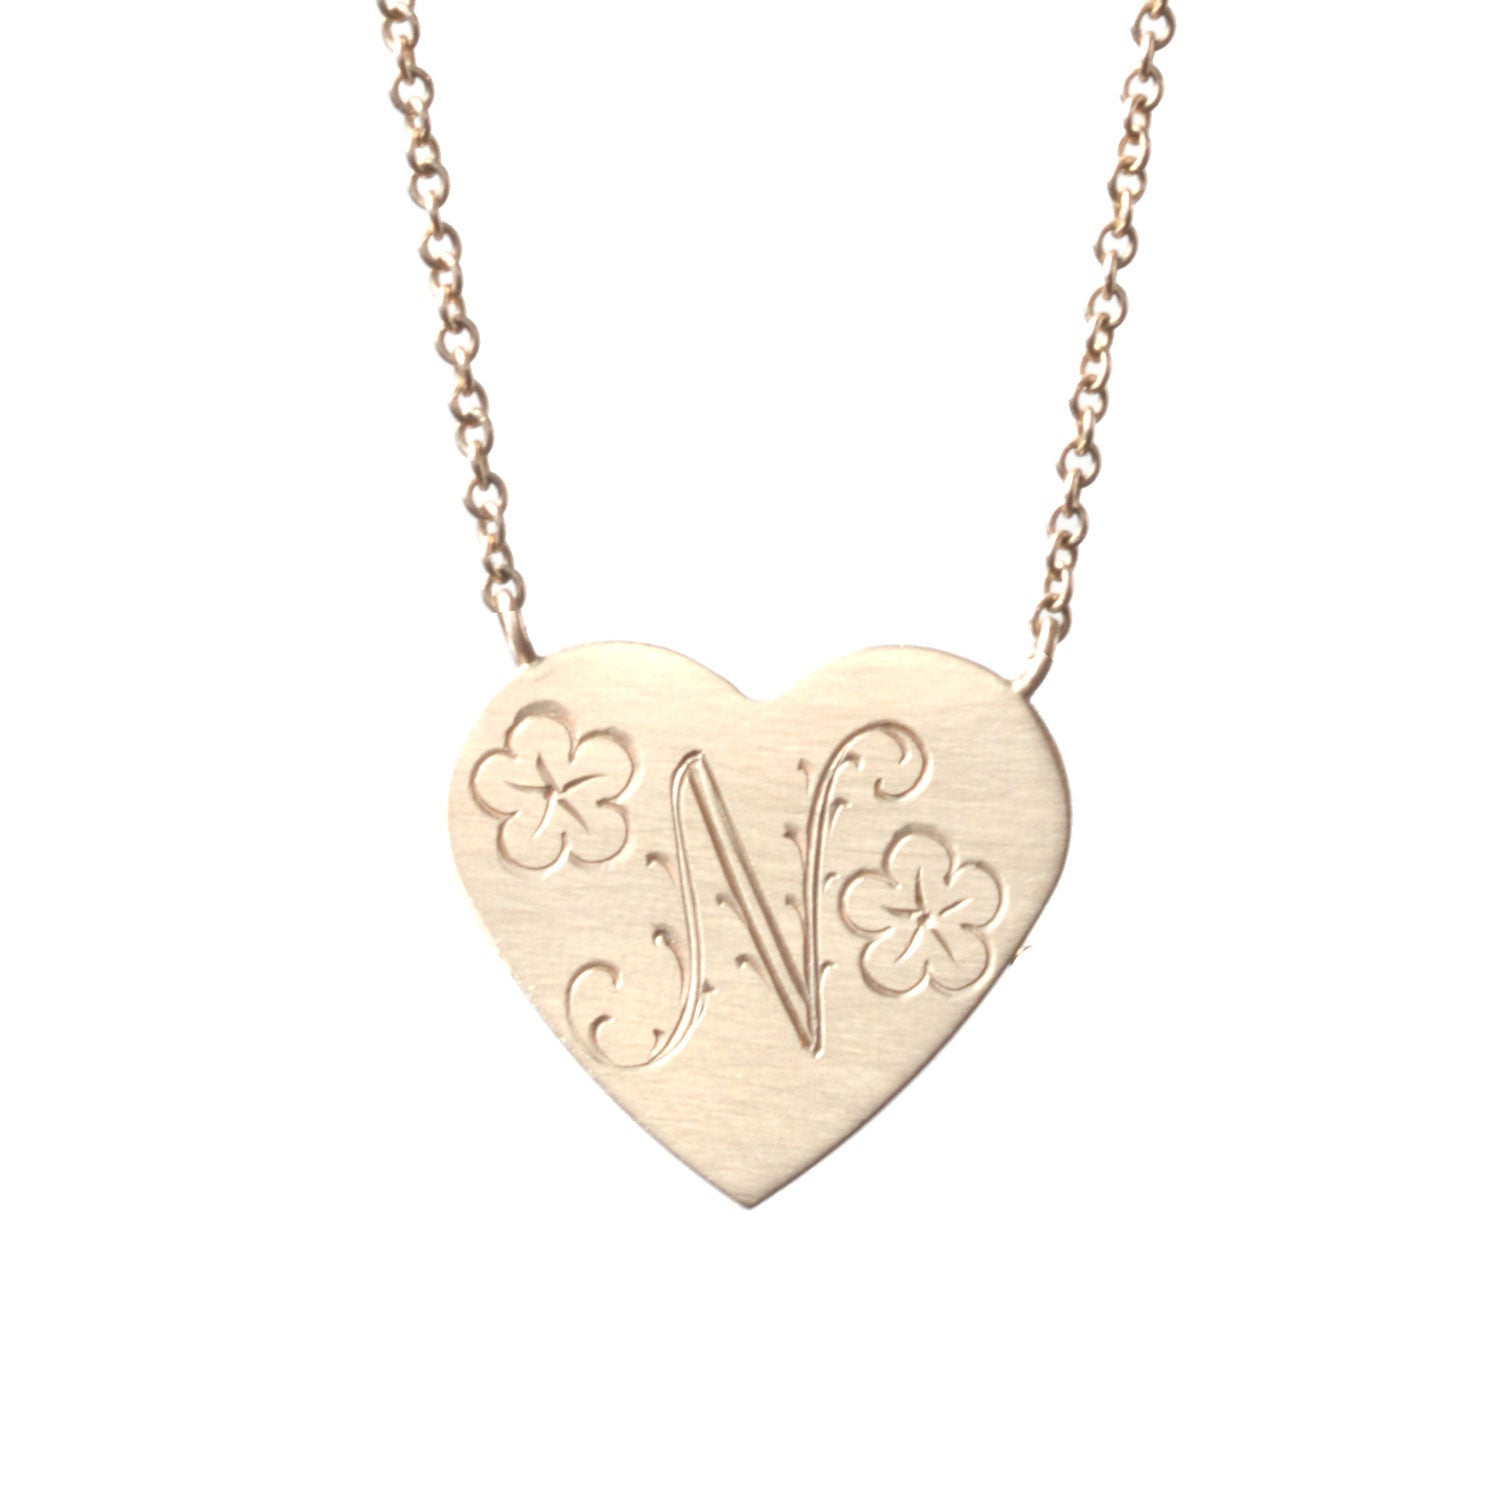 Floral Engraved Heart Necklace